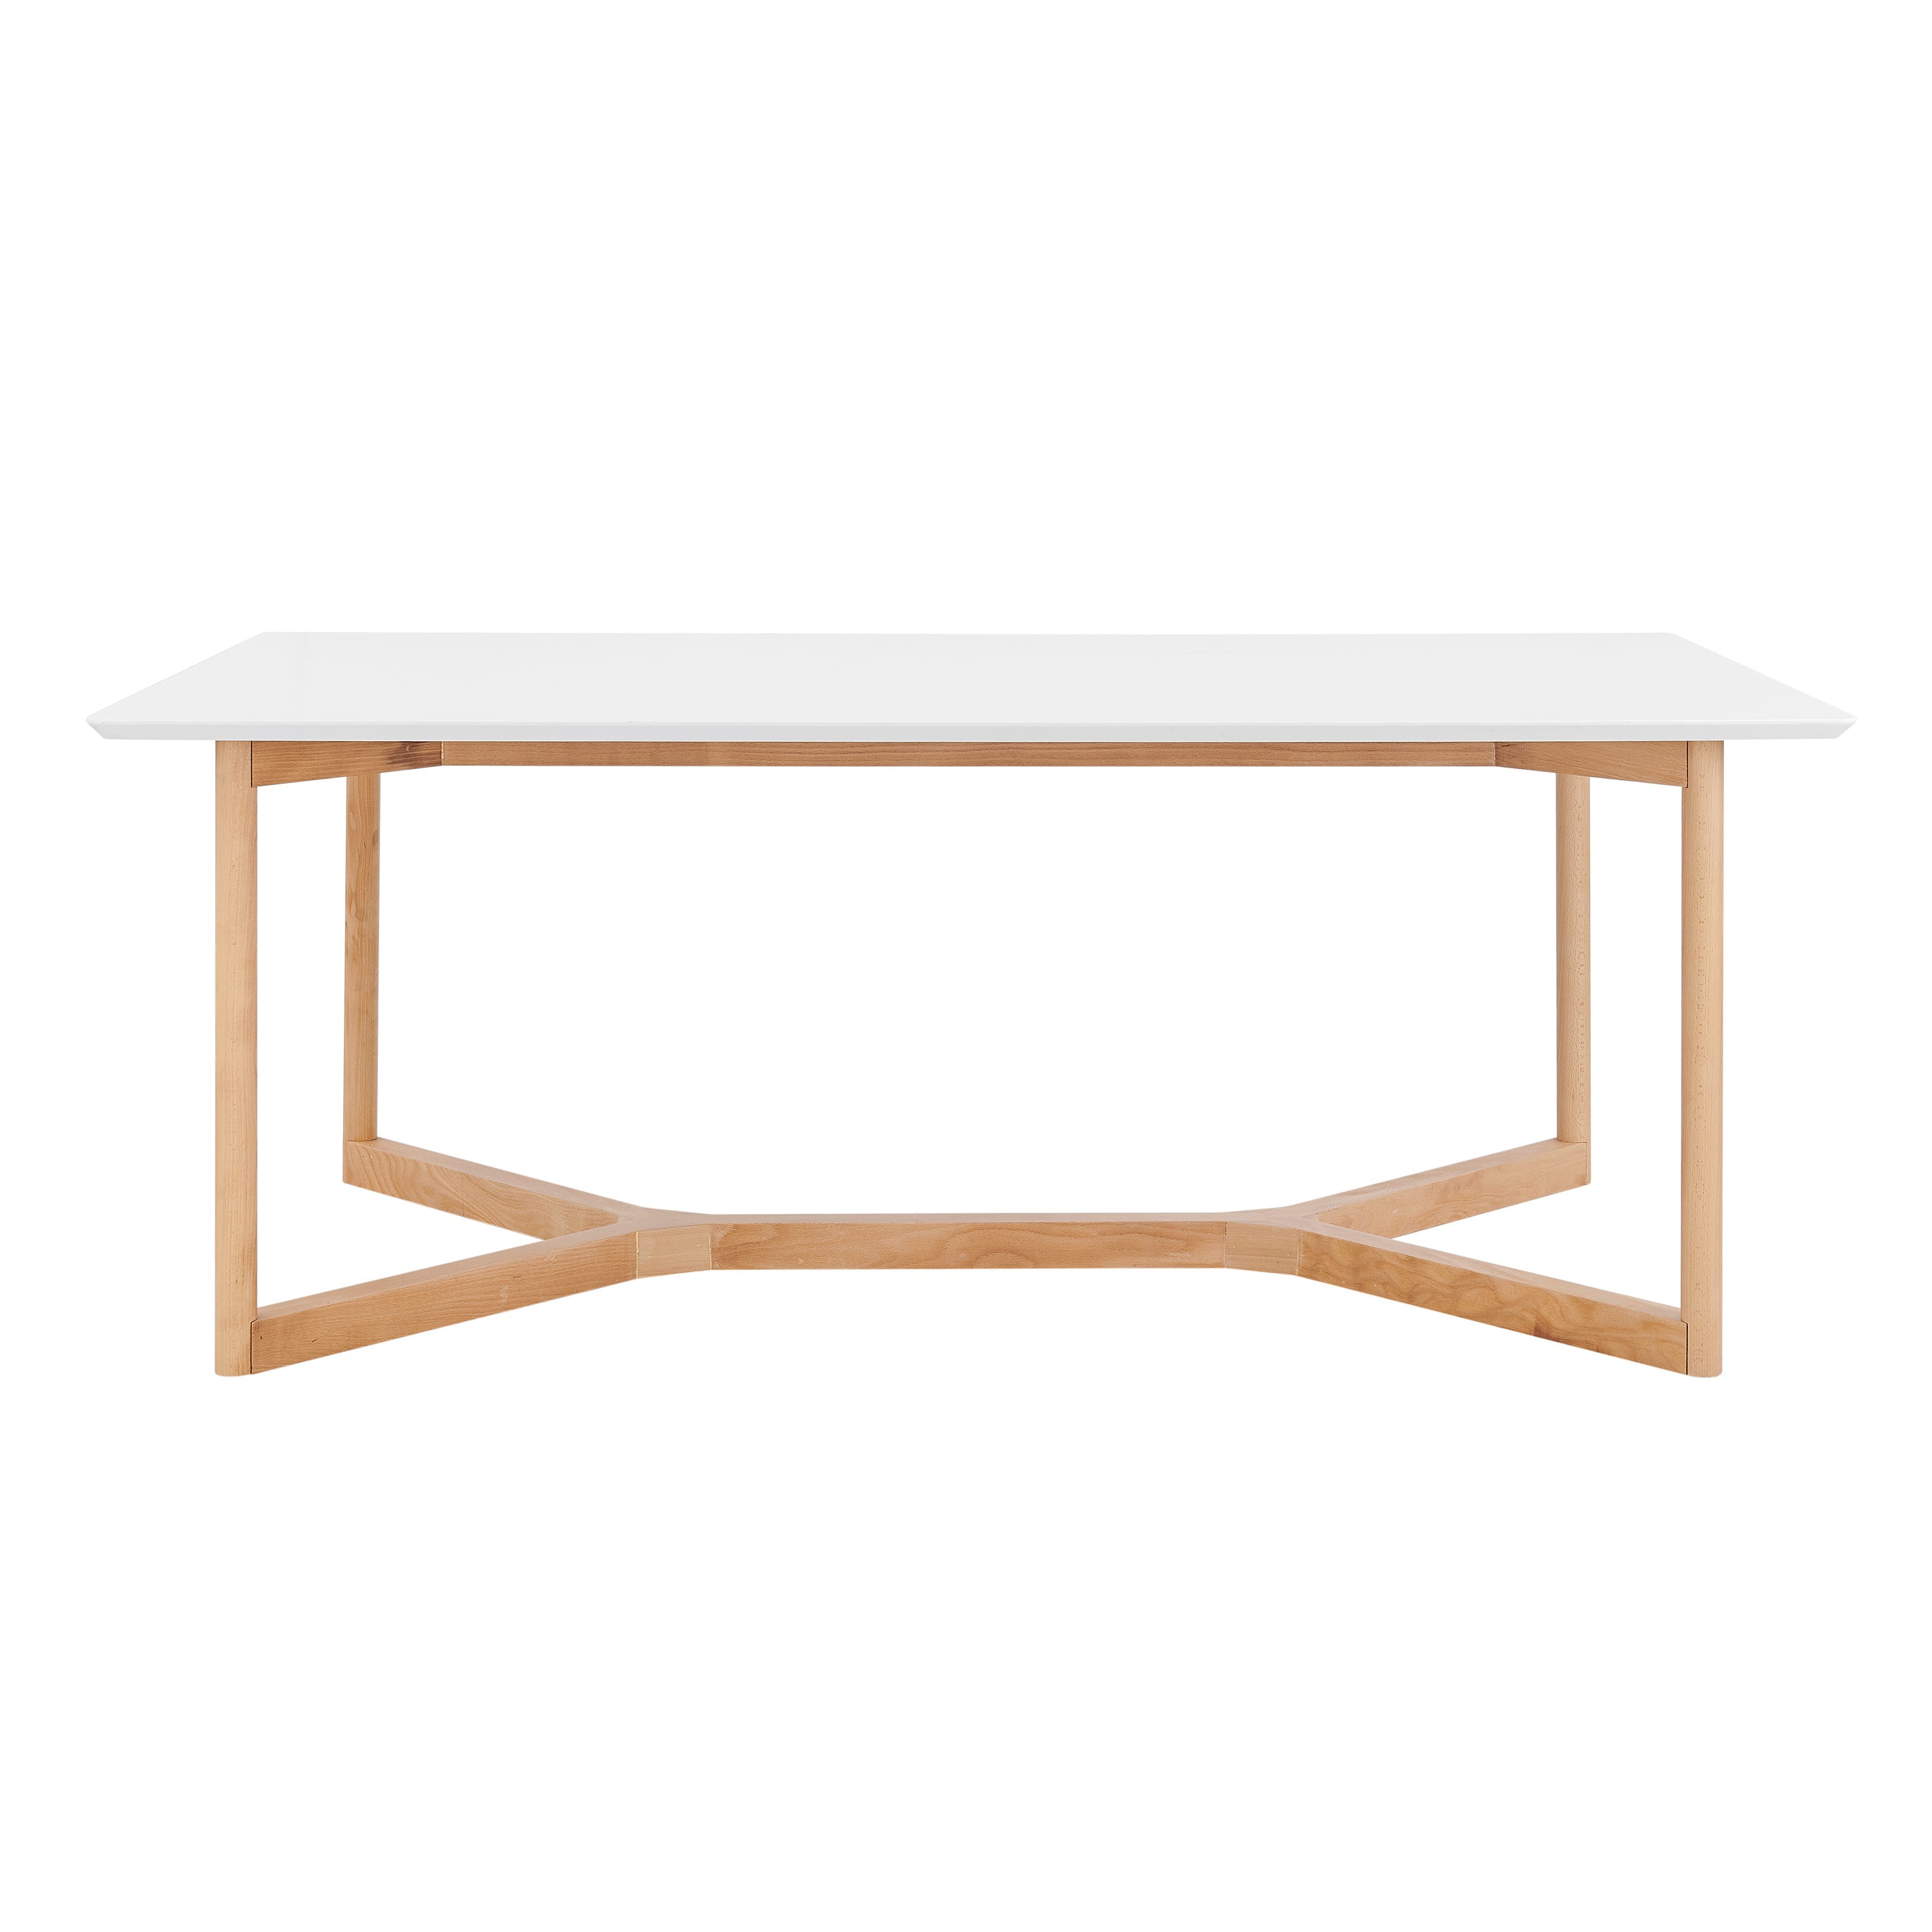 Euro Style Dining Tables - Aren 79" Rectangle Dining Table in Matte White Top with Natural Beech Wood Base